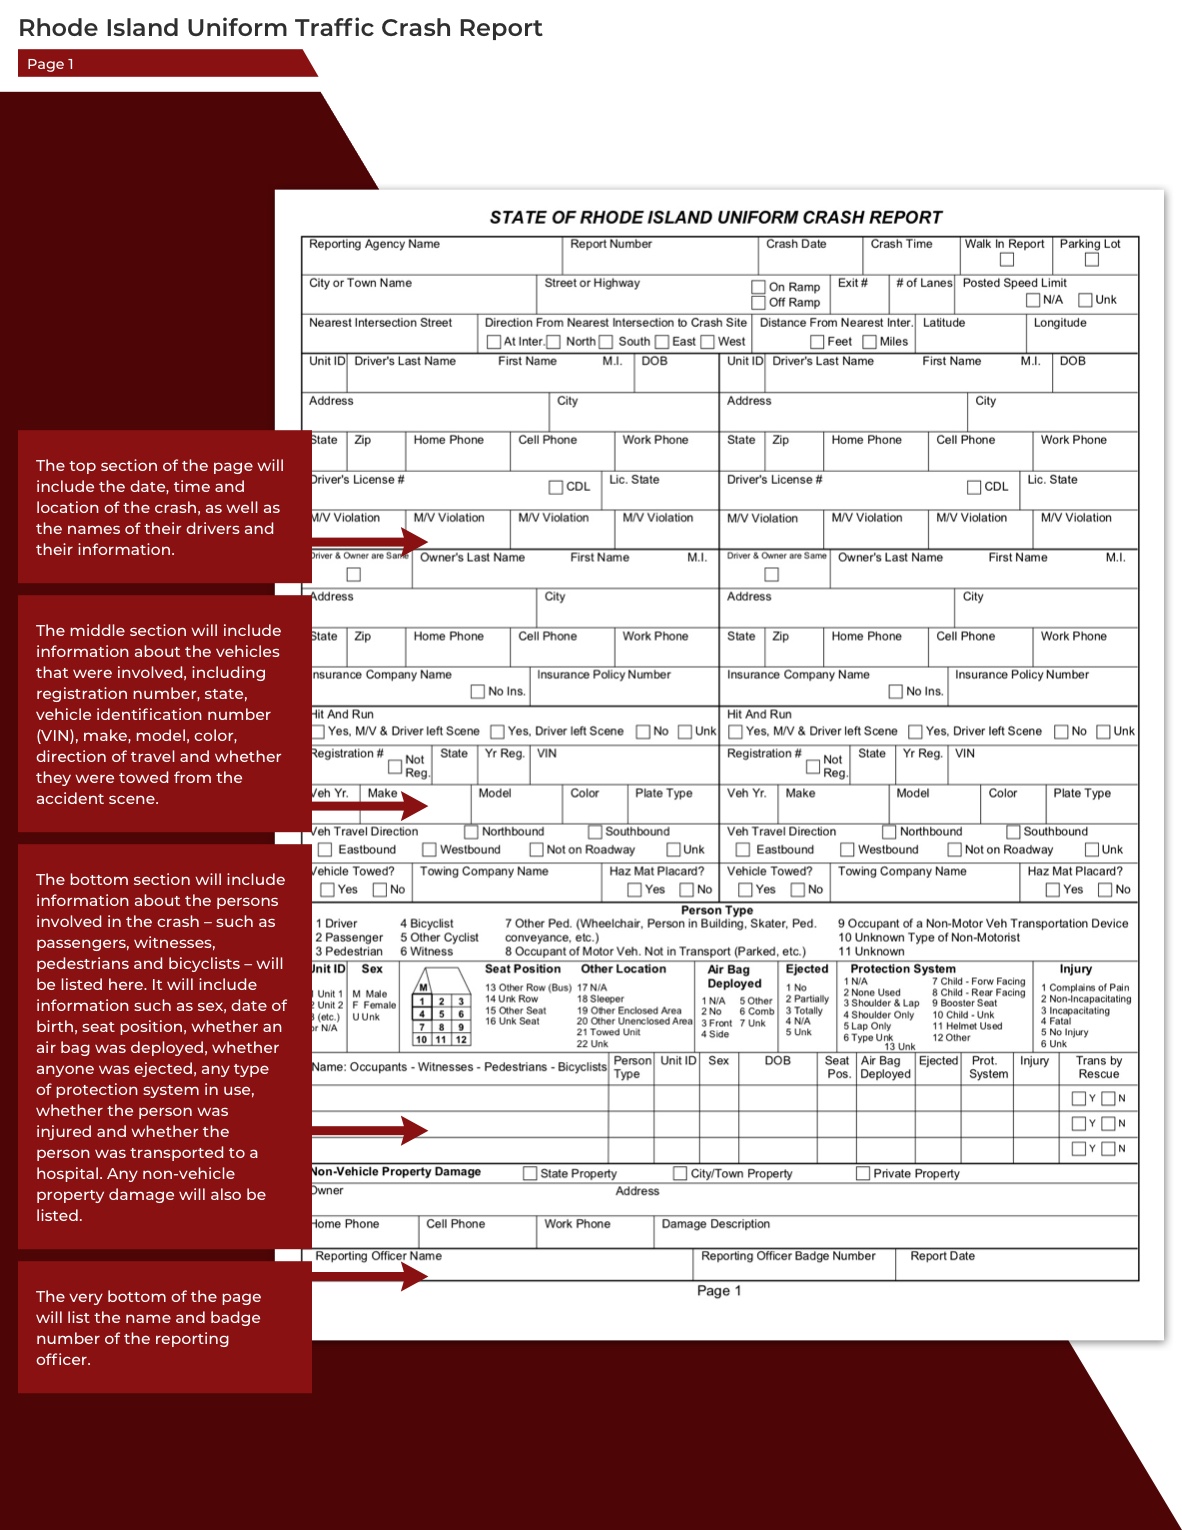 Rhode Island Accident Report page 1